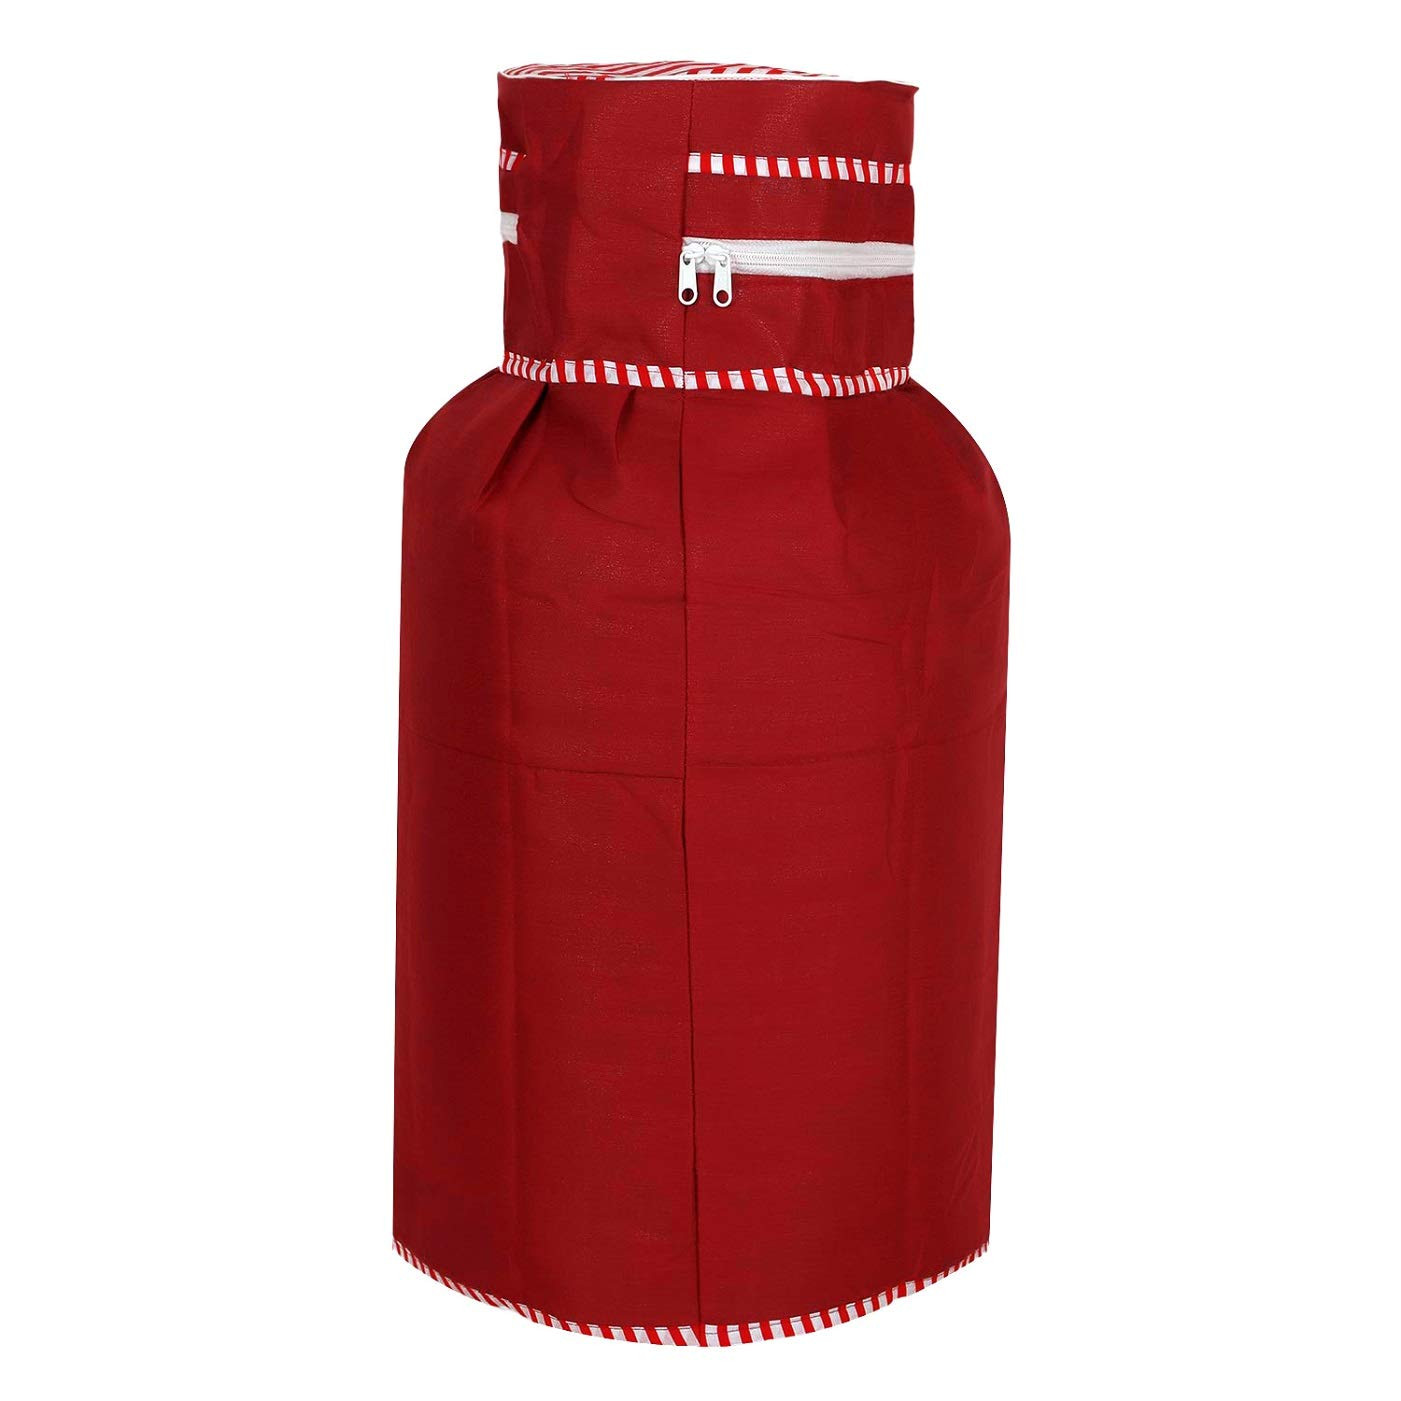 Kuber Industries Cotton Dust-Water Proof LPG Gas Cylinder Cover (Red) - CTKTC40740